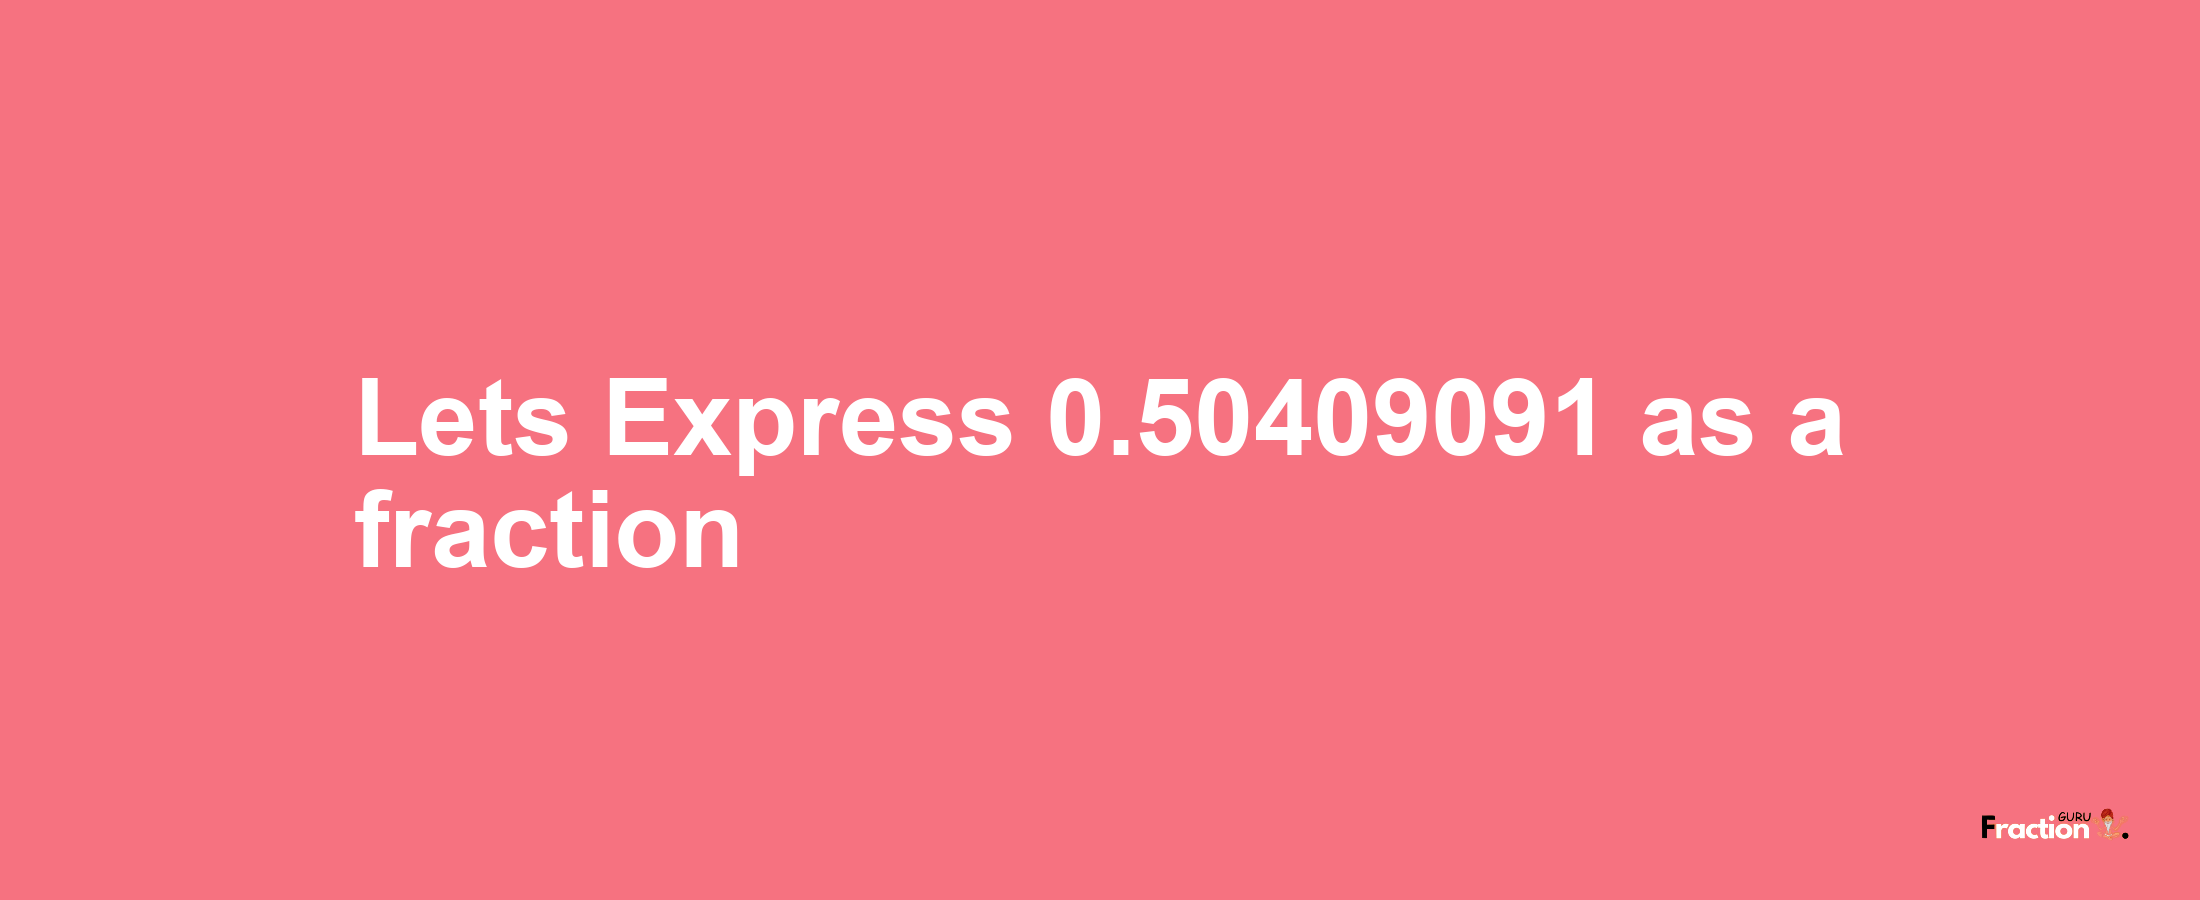 Lets Express 0.50409091 as afraction